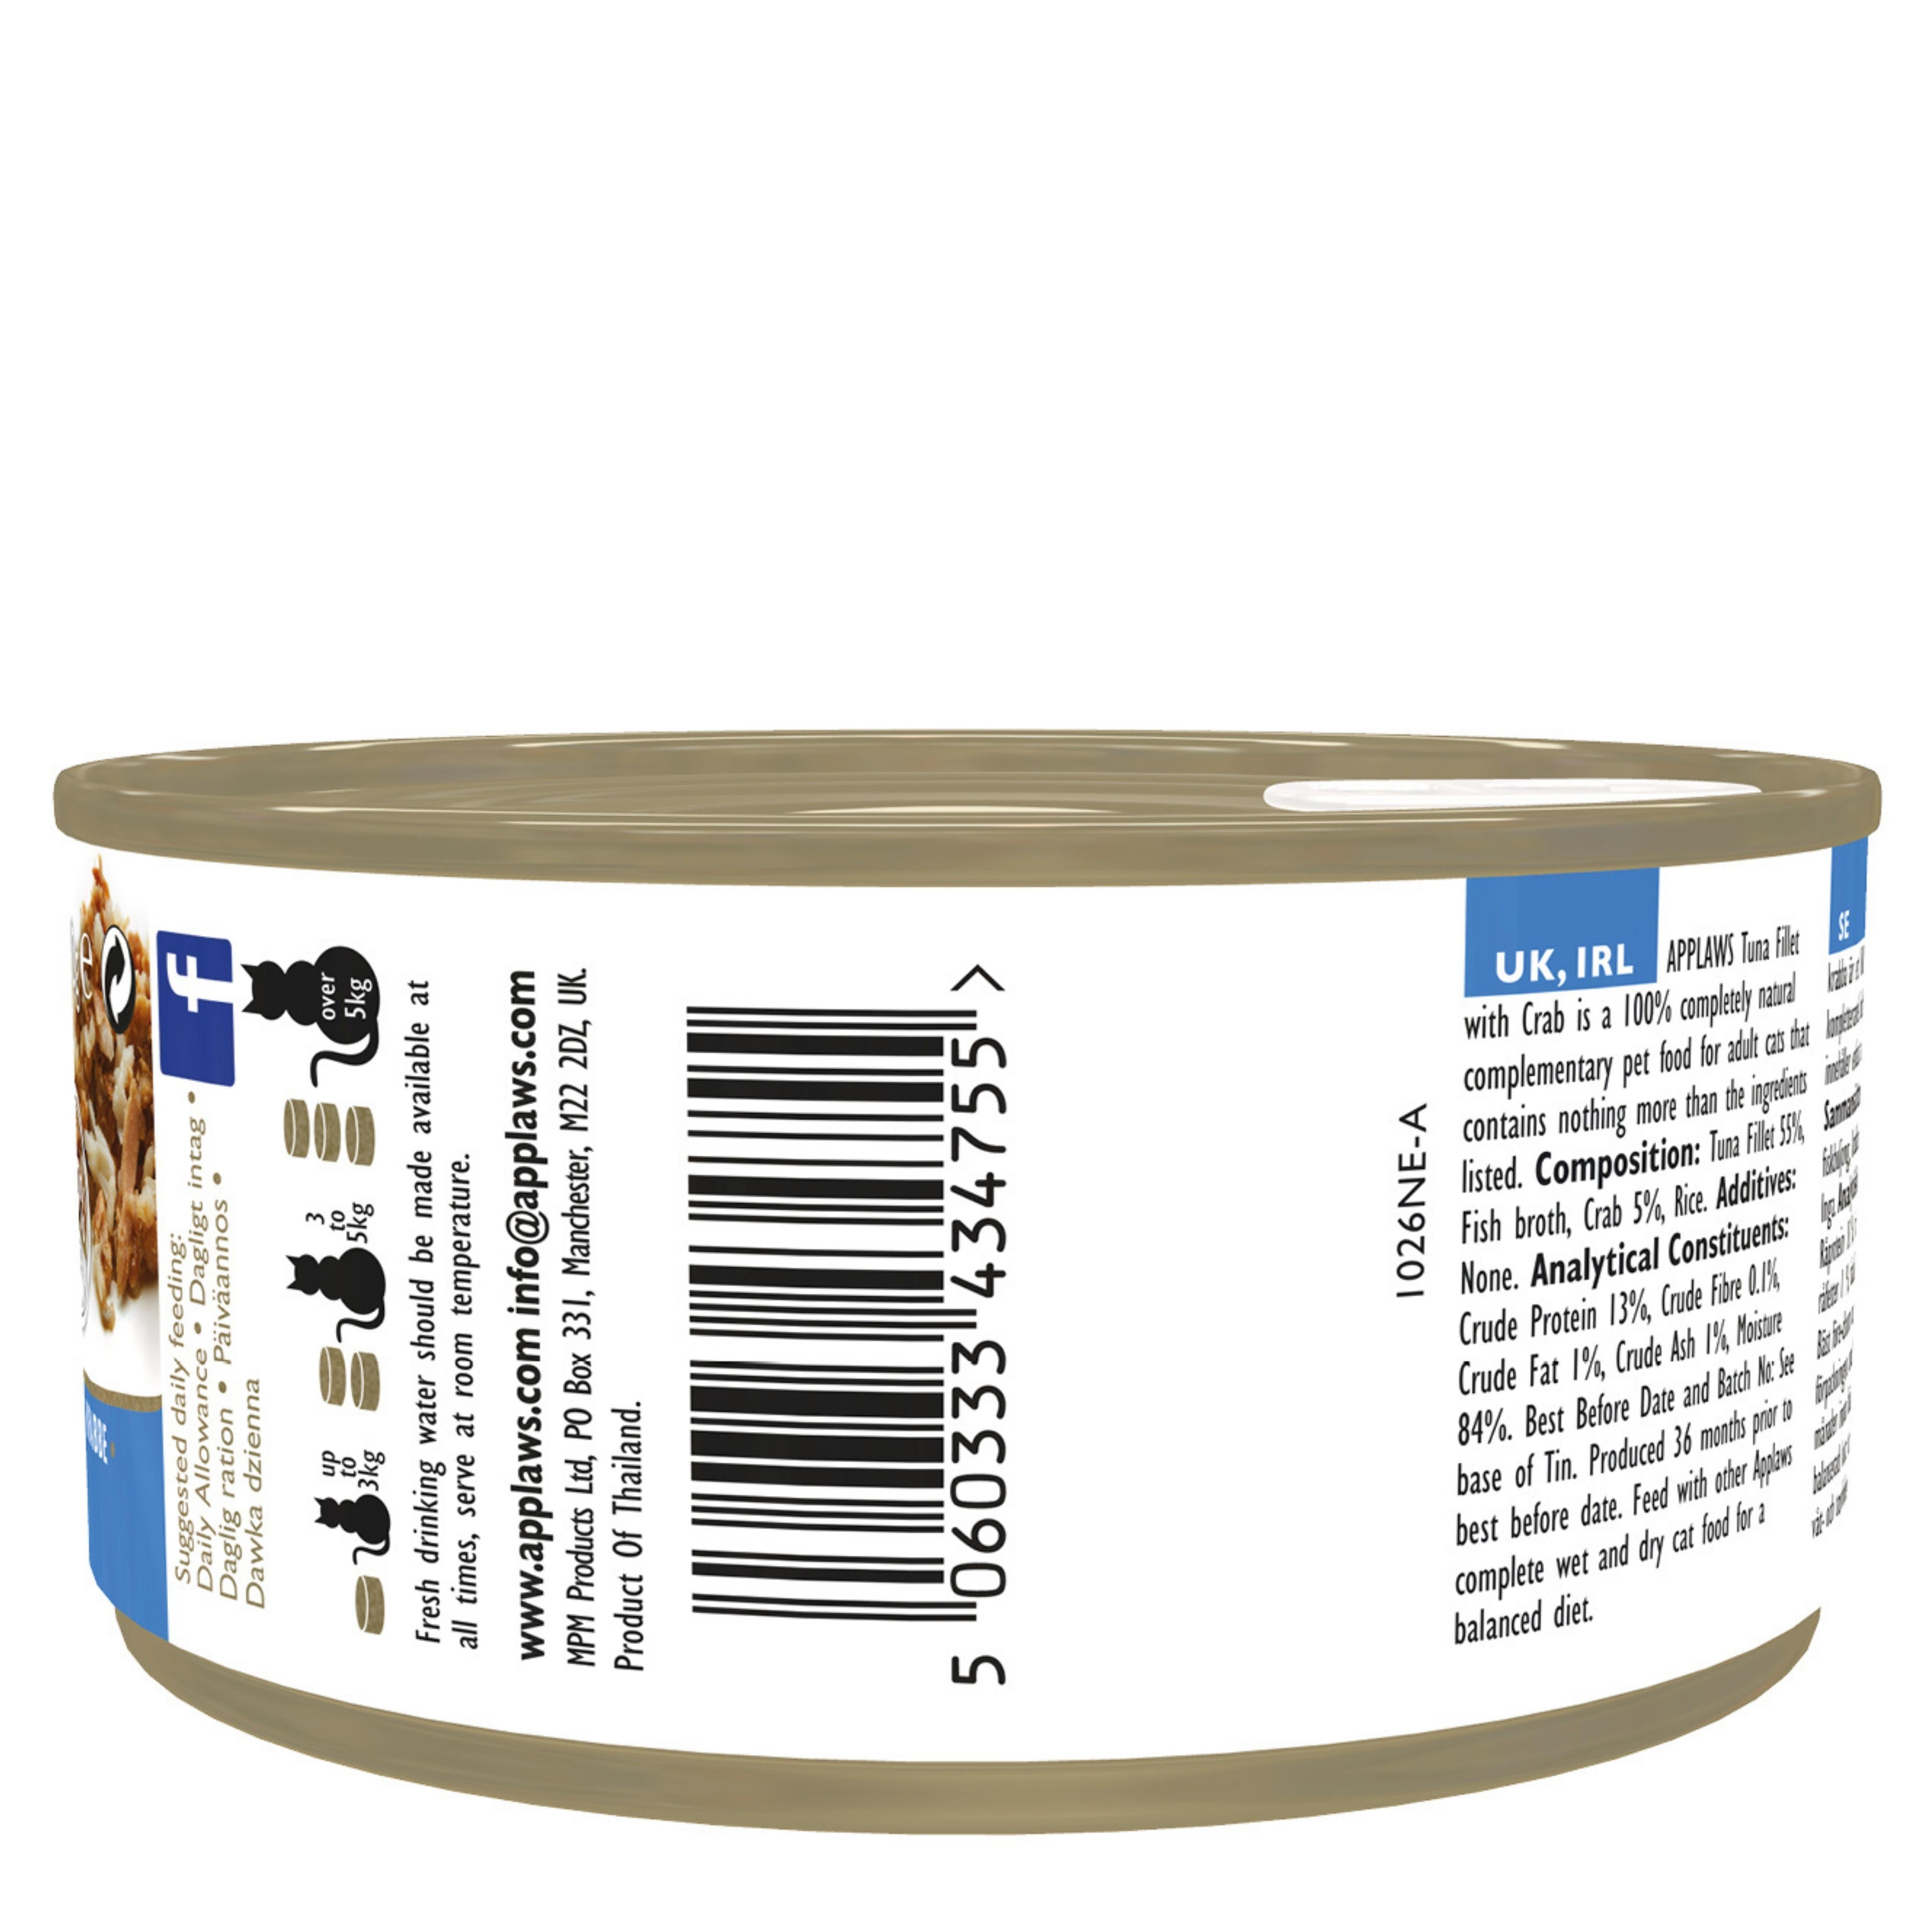 Applaws Cat Wet Food 70g Tuna Fillet with Crab in Broth